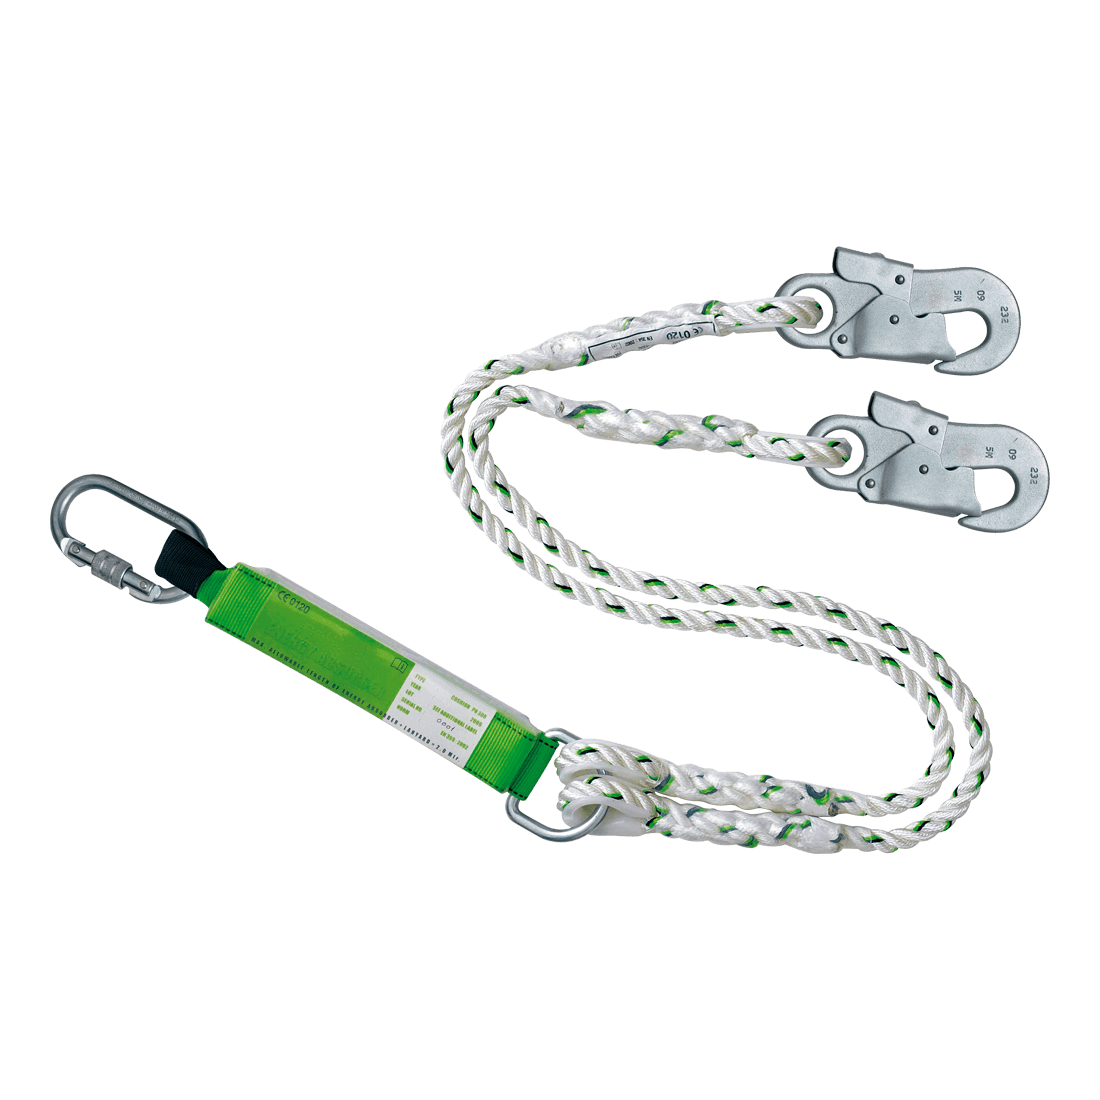 FORKED ROPE LANYARD ENERGY ABSORBER